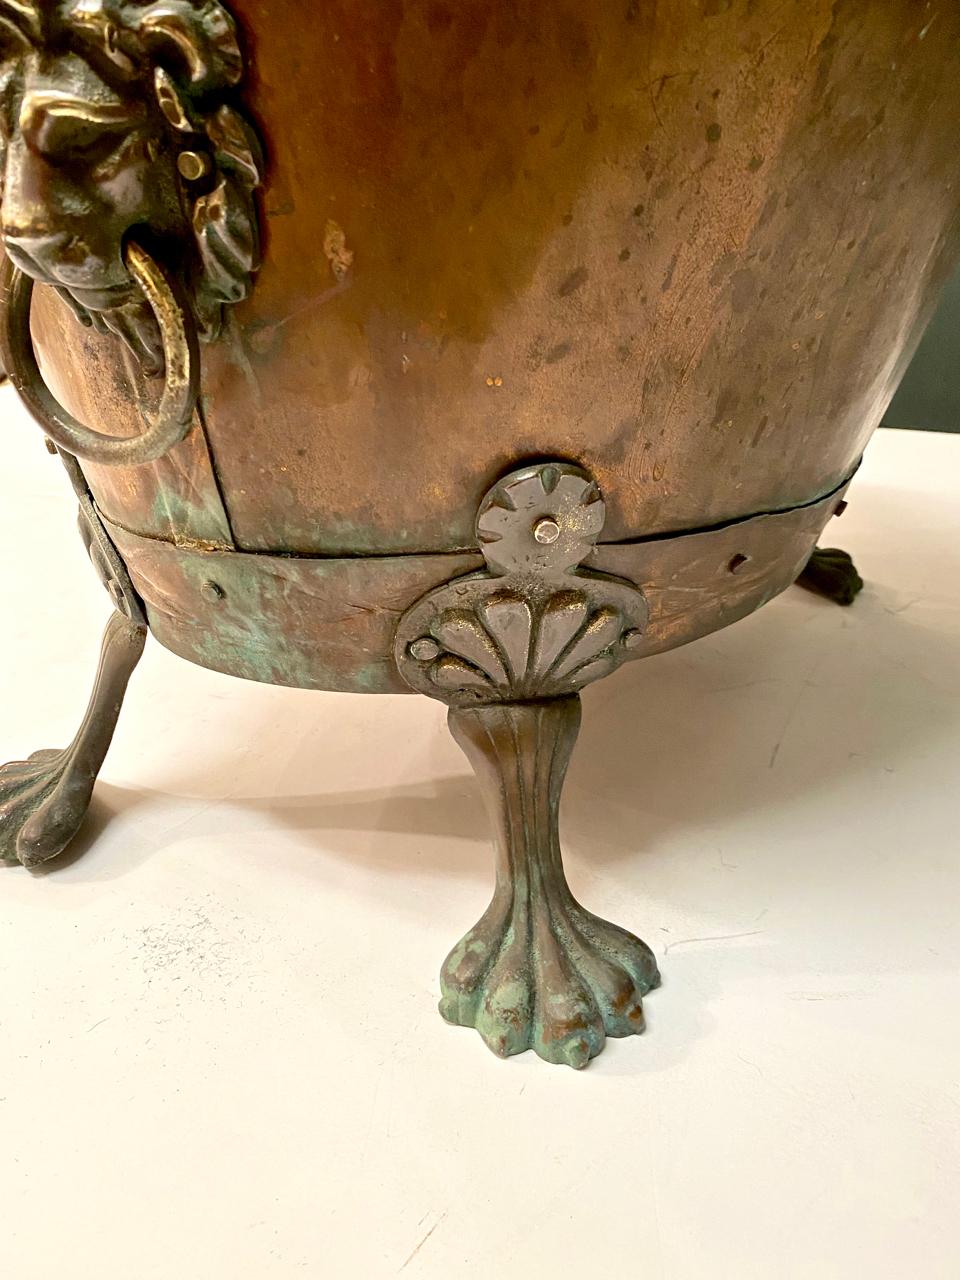 This mid-19th century English coal bin has seen many years of use and has acquired a deep, natural and desirable patina to its copper bin. The lion head side handles together with the lion paw feet make this a great decorative element.